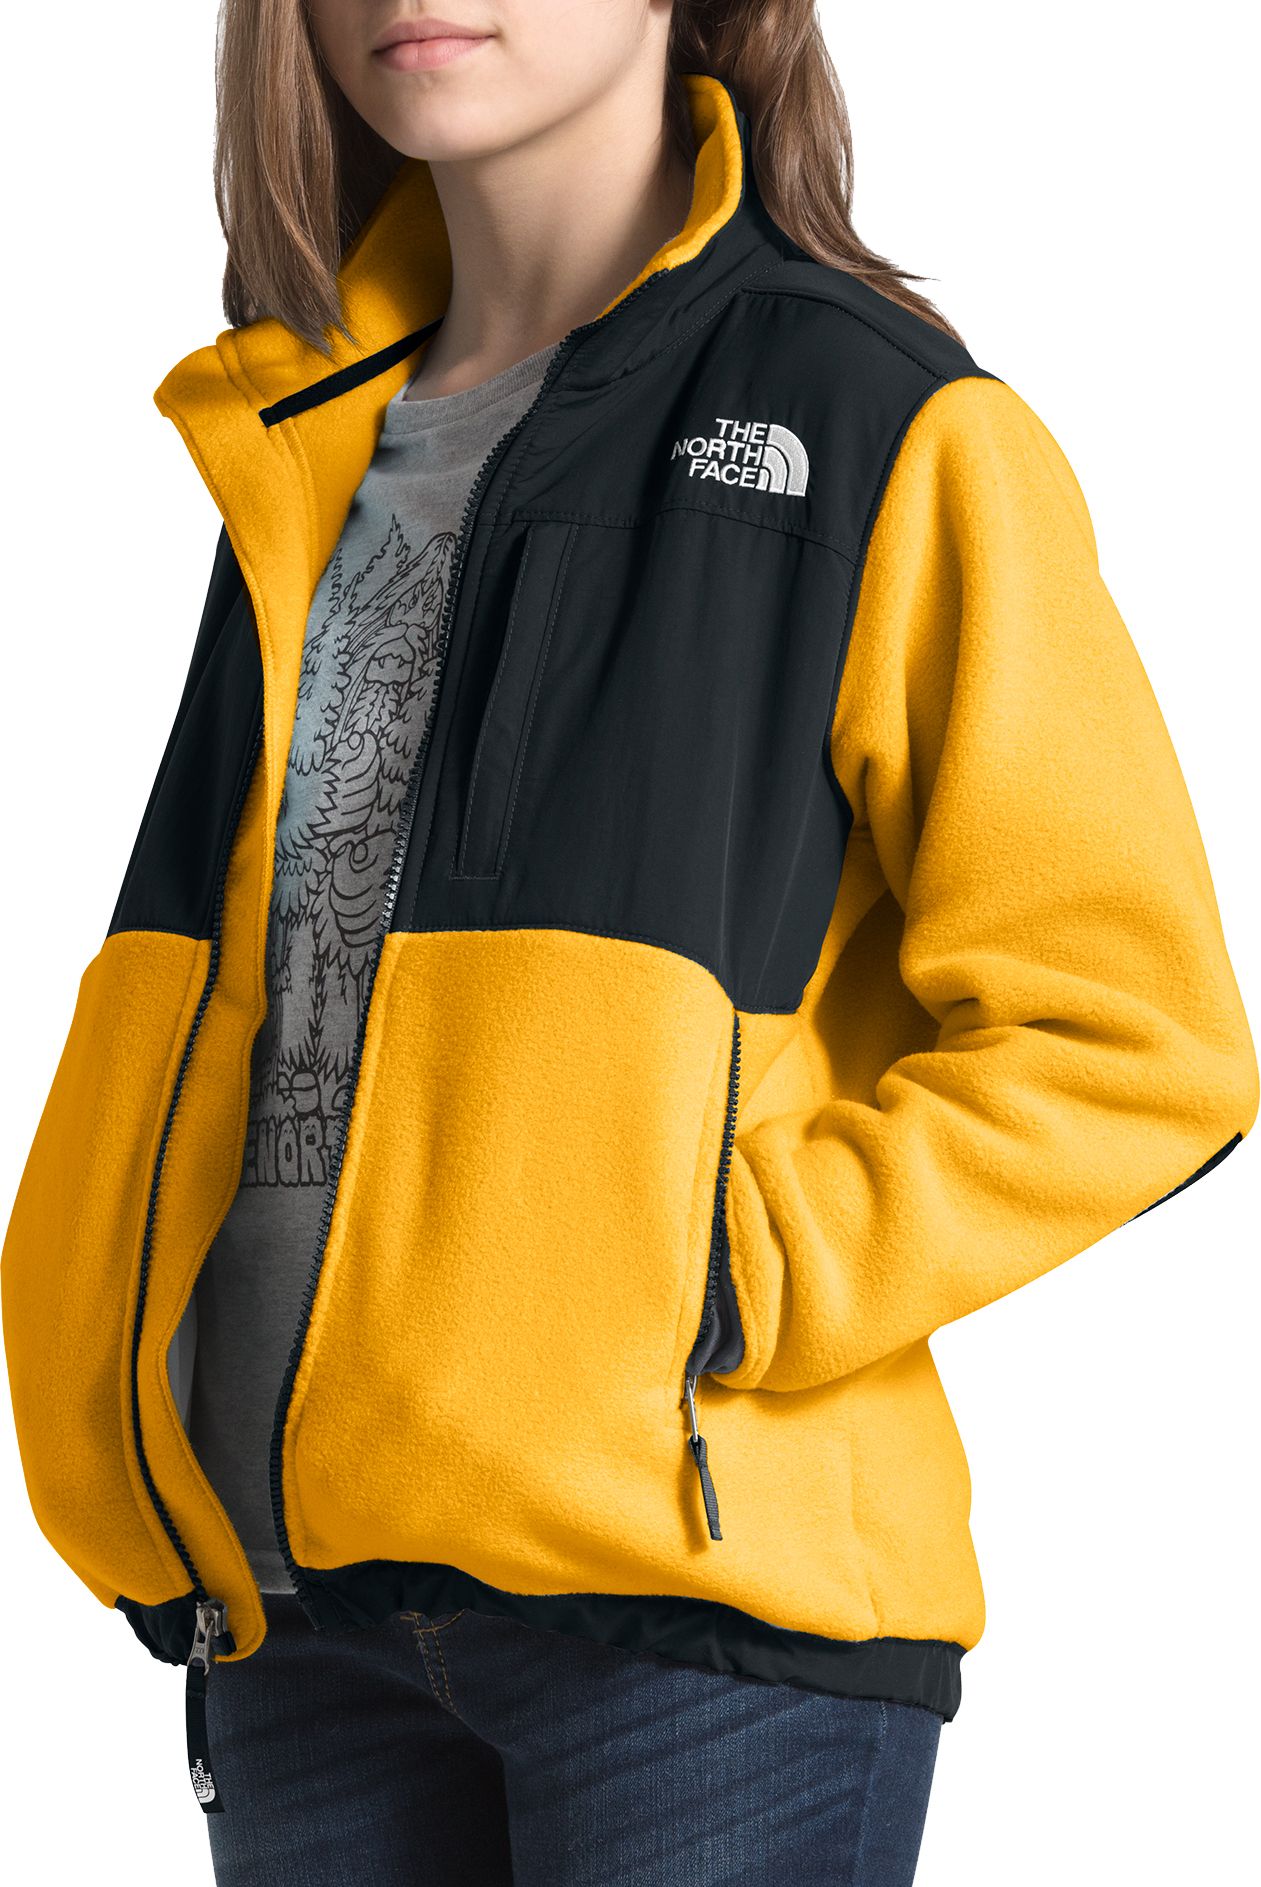 north face youth fleece sale